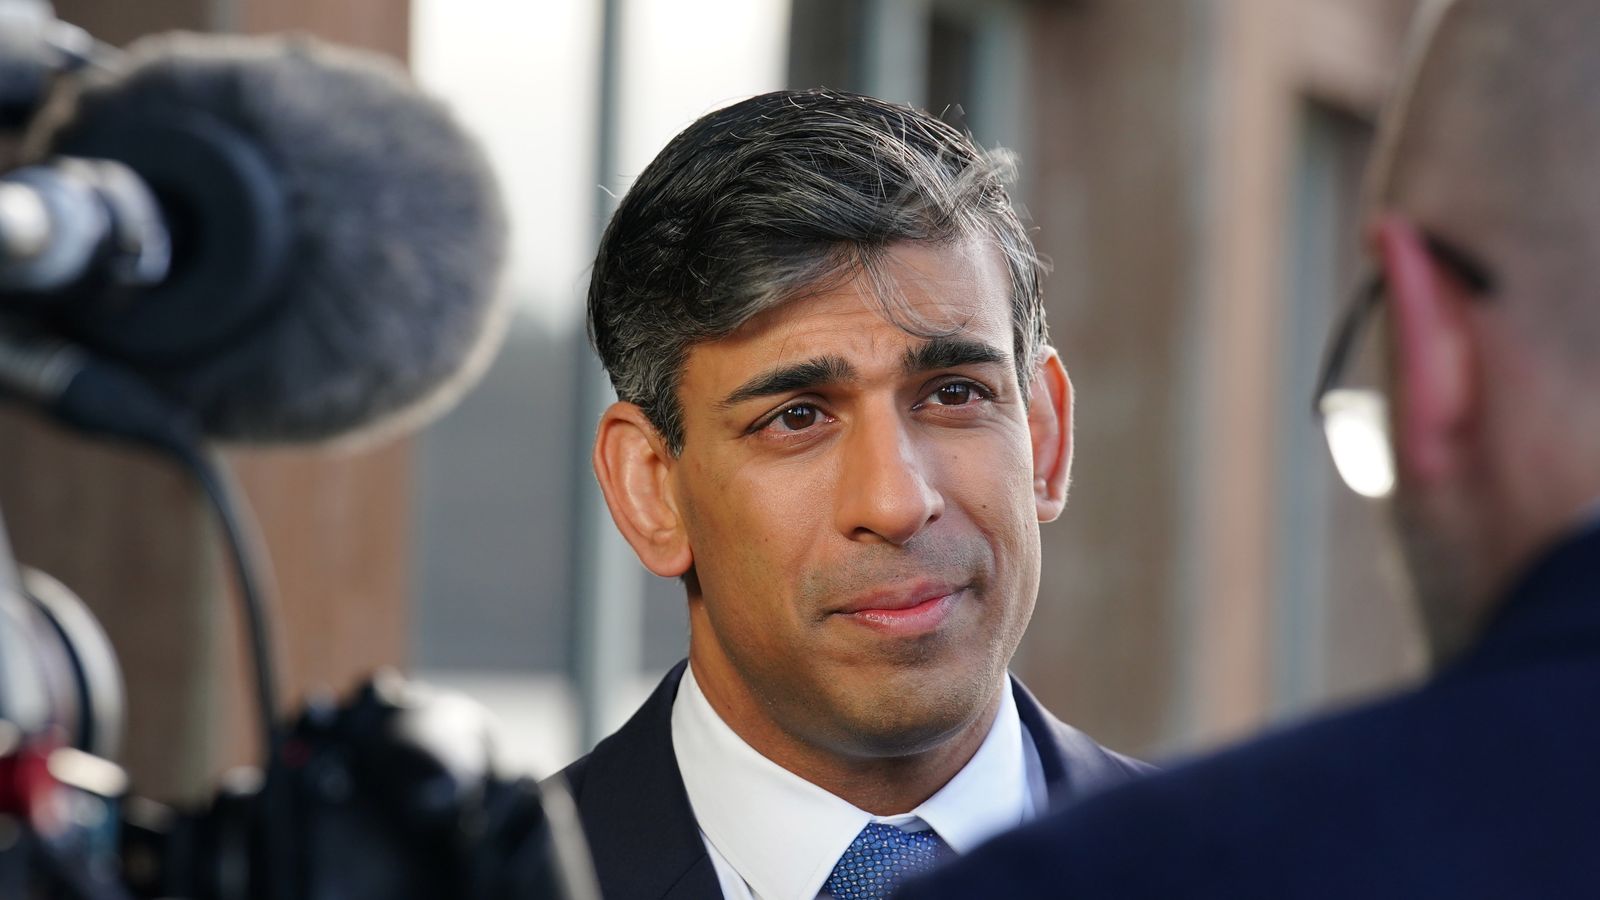 Rishi Sunak condemns Lee Anderson - as suspended MP doubles down on criticism of mayor Sadiq Khan